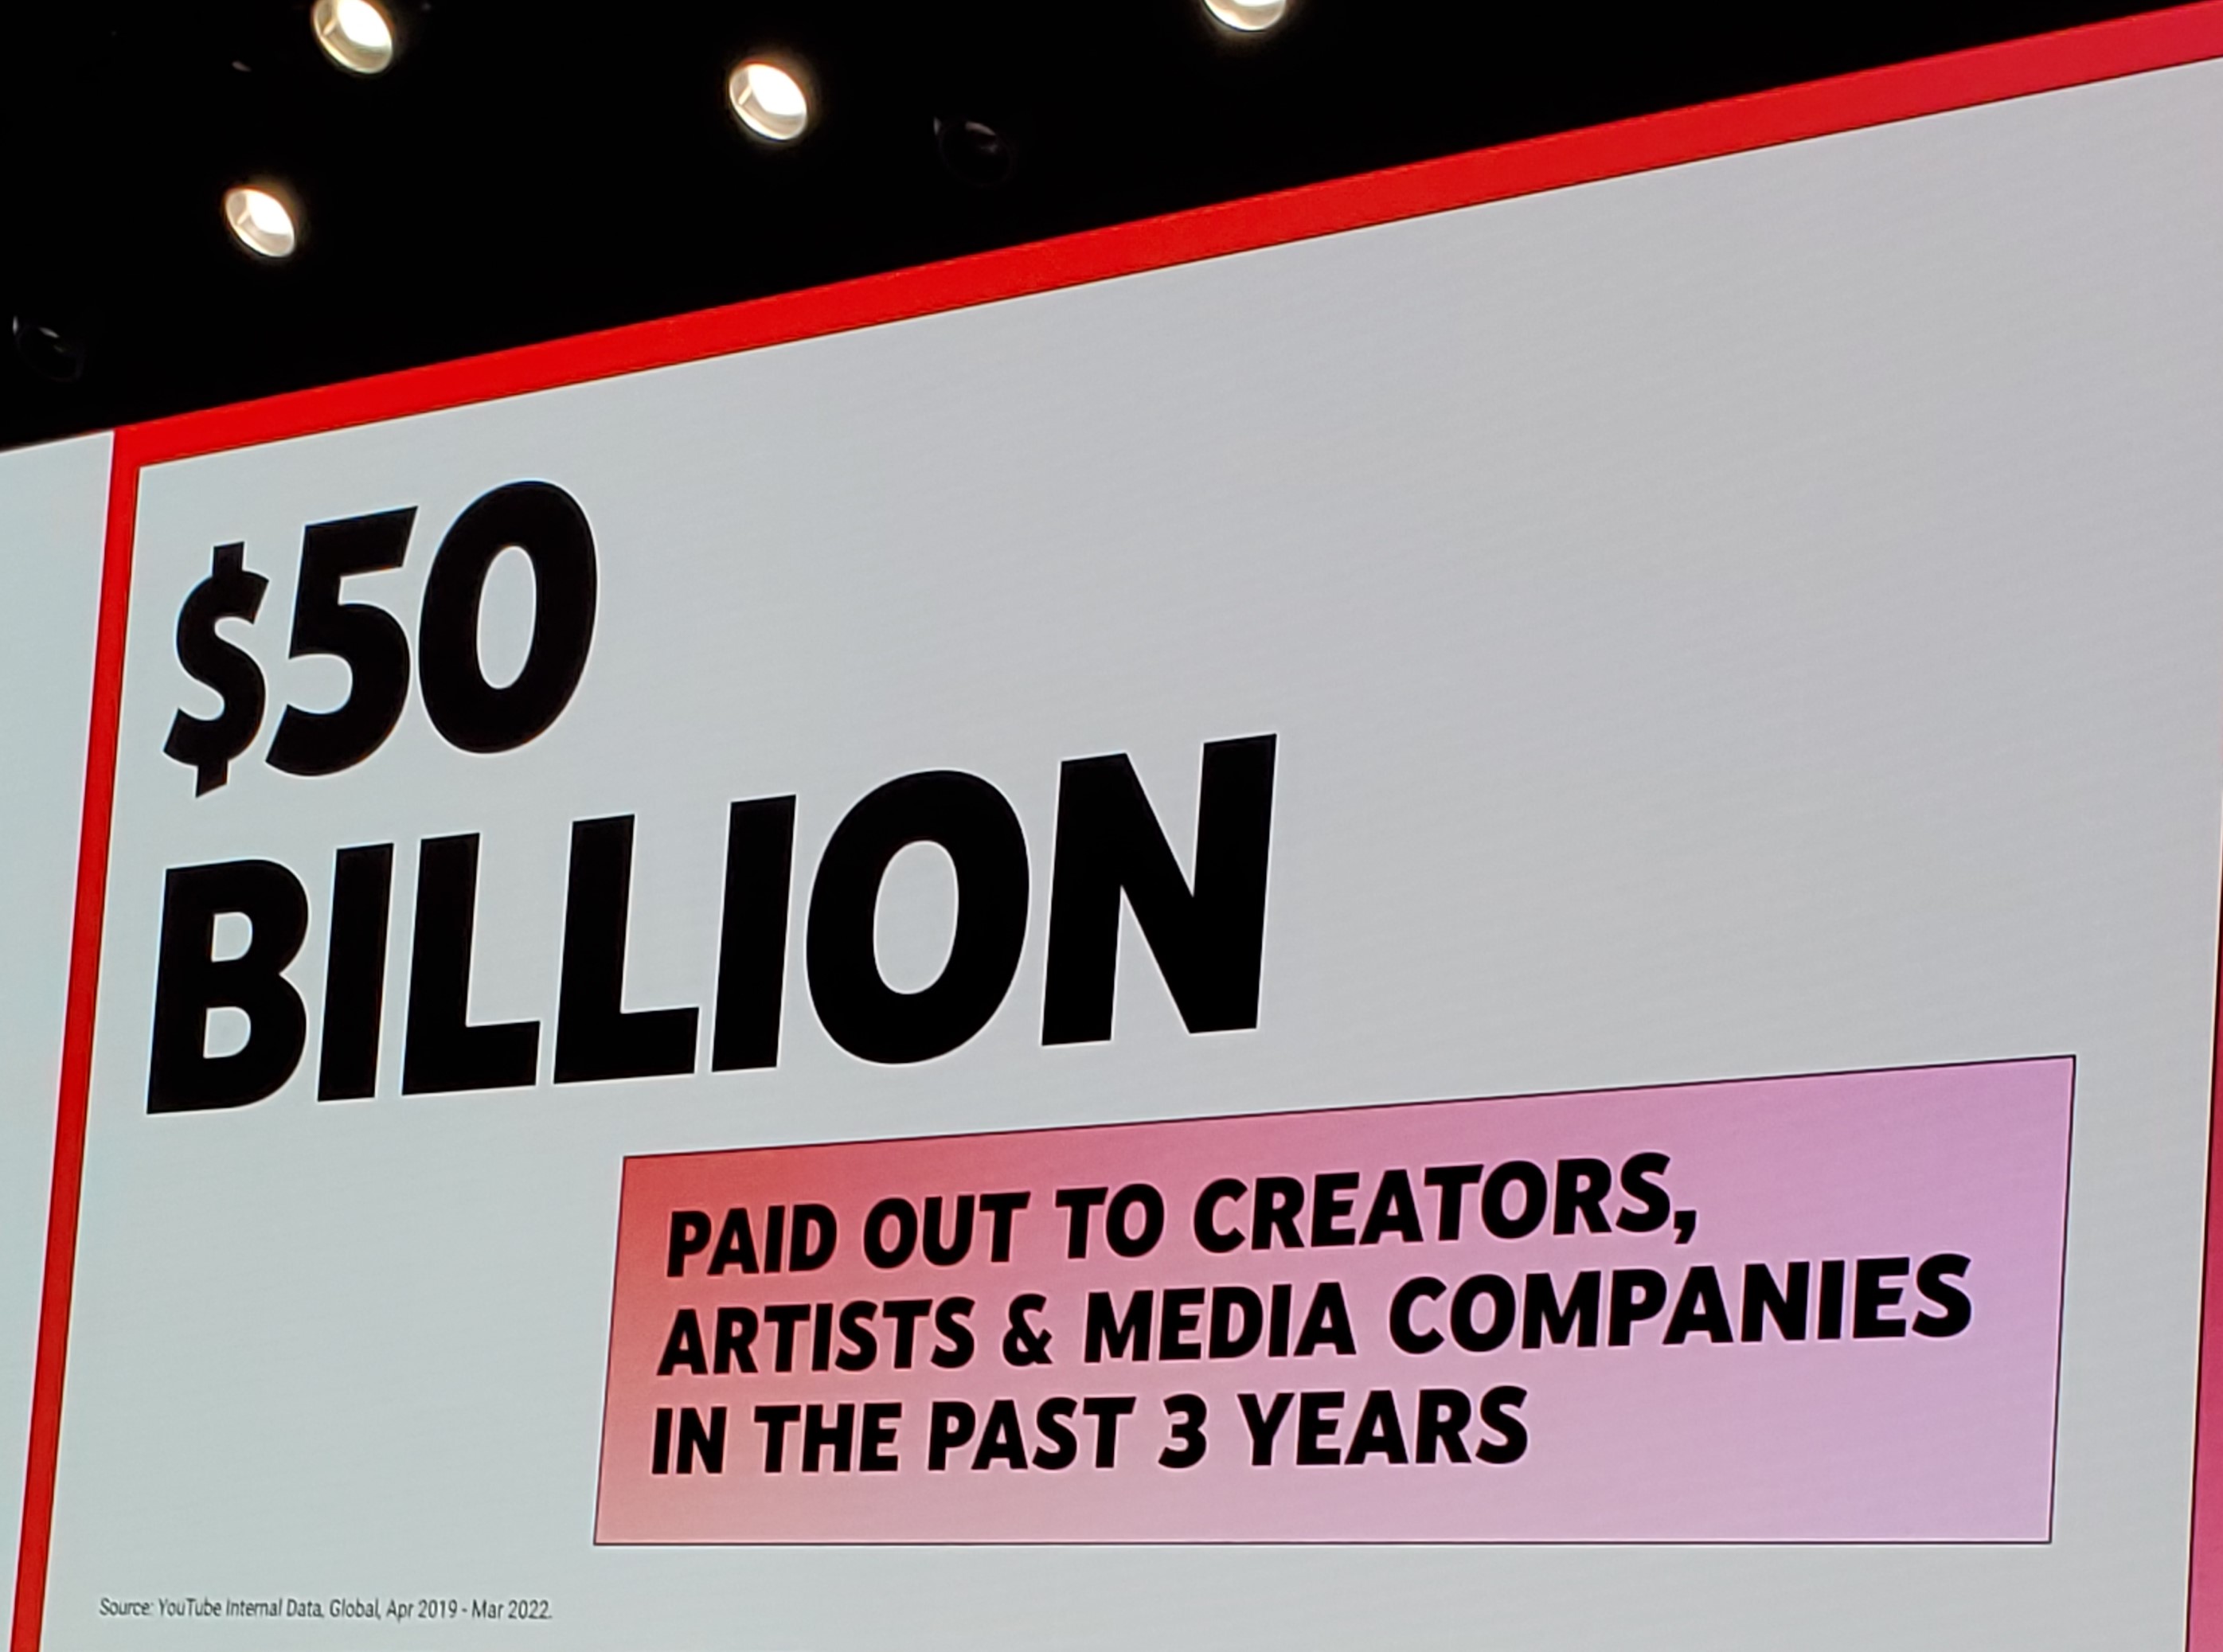 $50 billion YouTube revenue paid out to creators, artists, and media companies